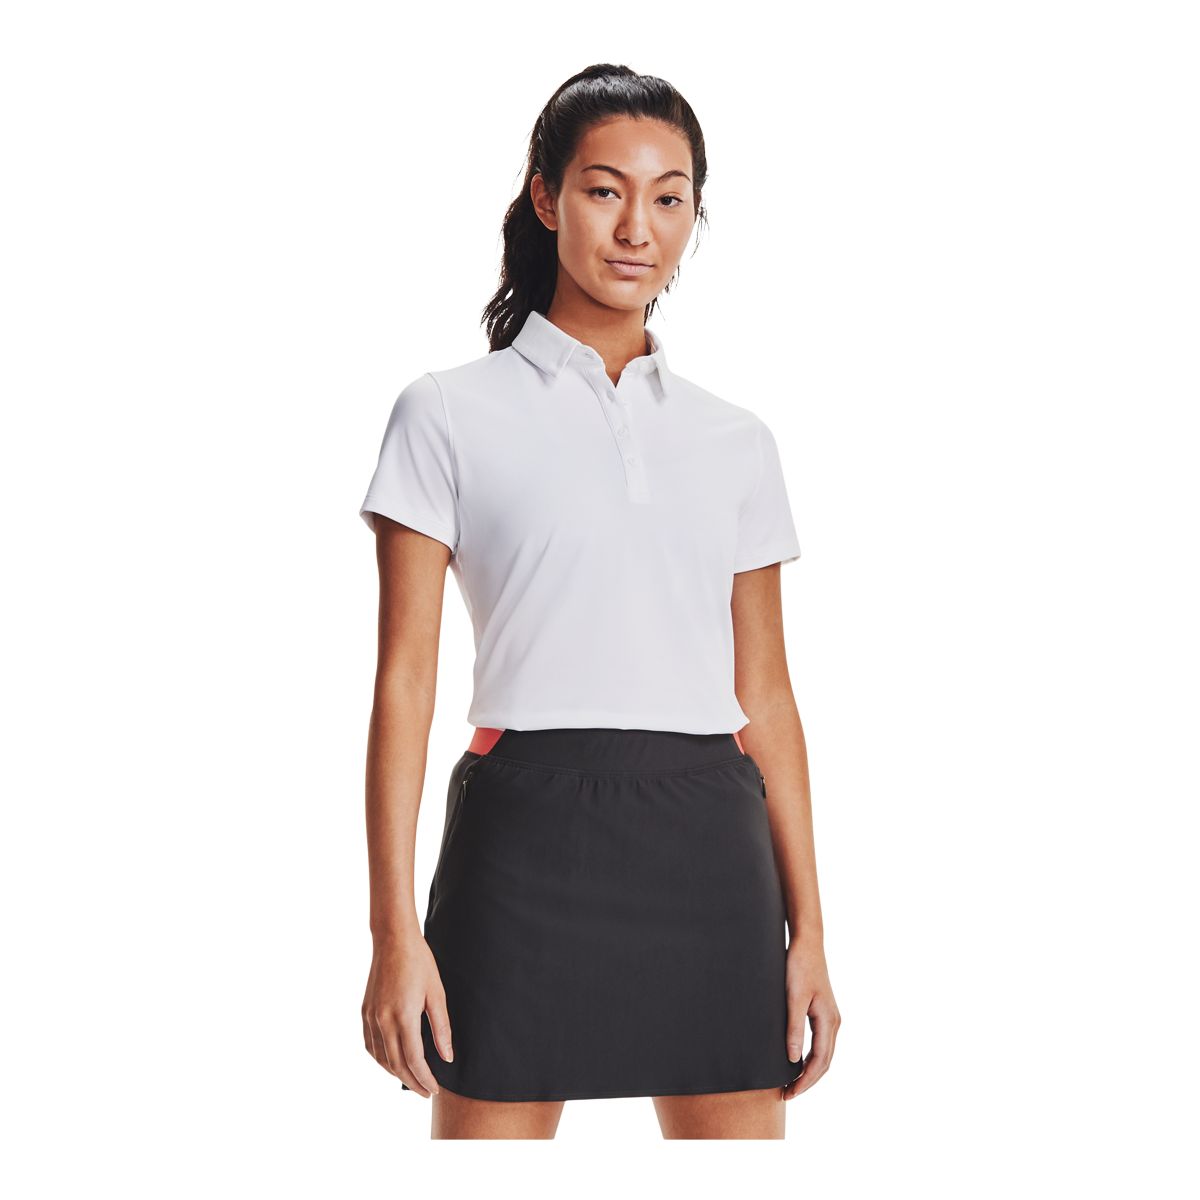 Image of The Under Armour Golf Women's Zinger Polo